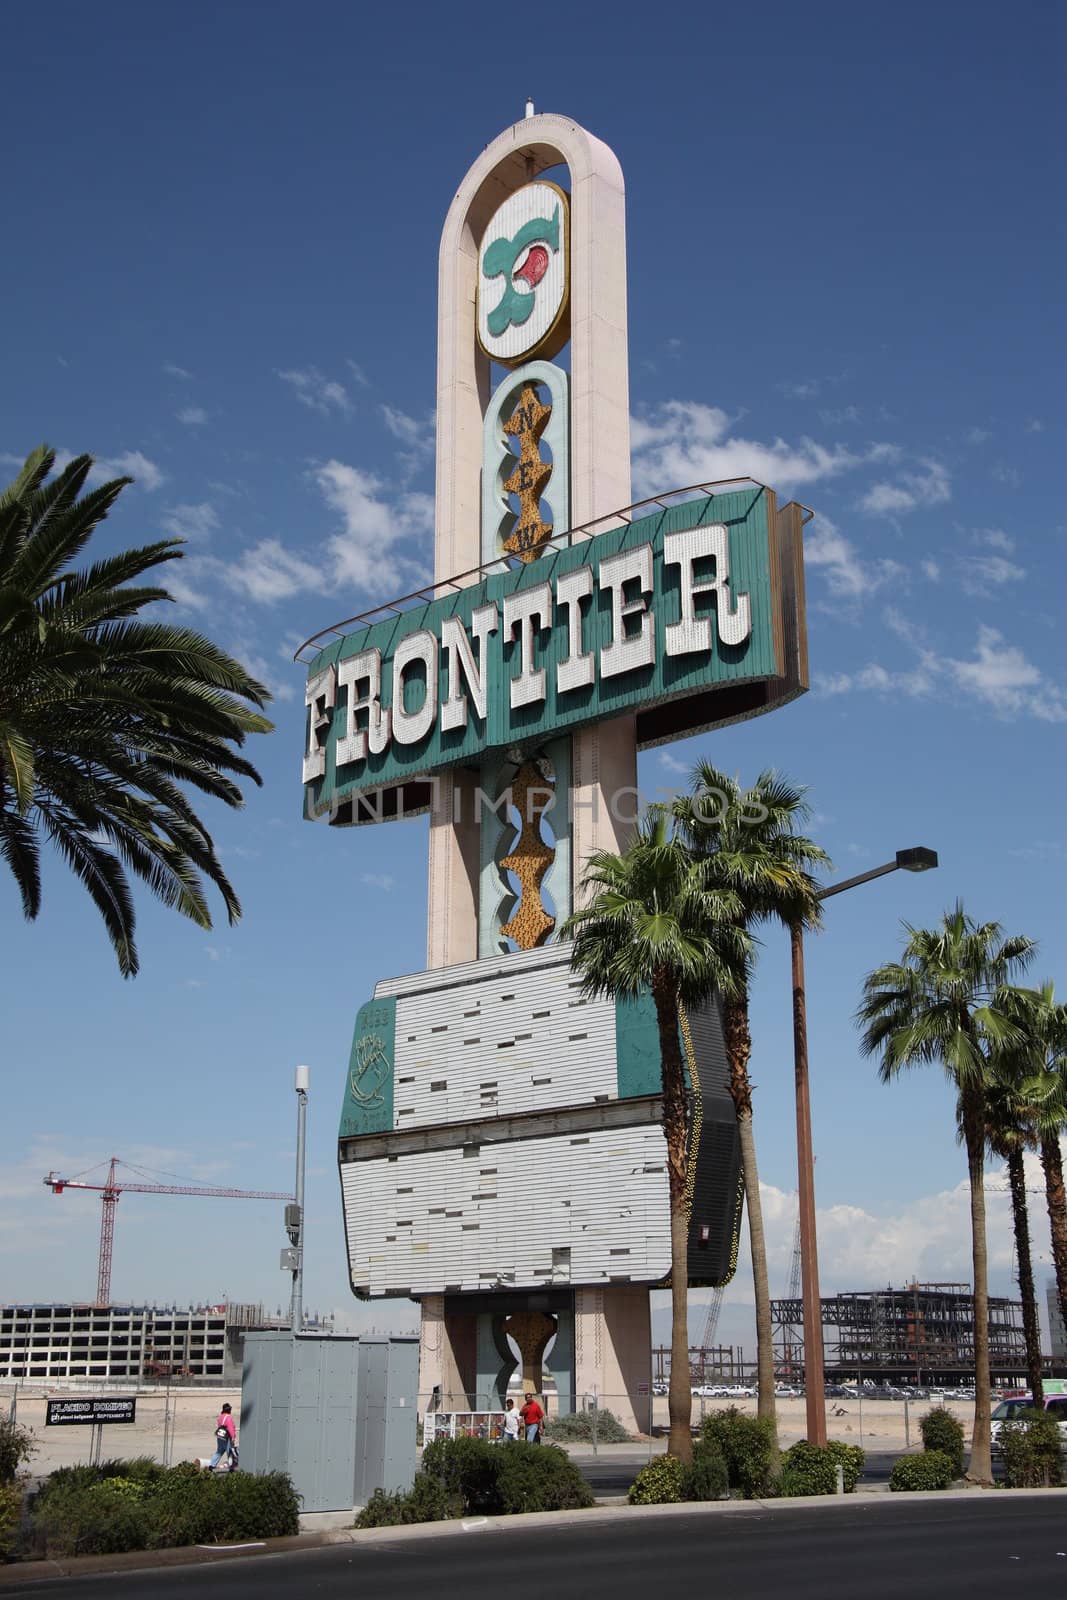 Old Sign from demolished Frontier Hotel on the strip in Las Vegas